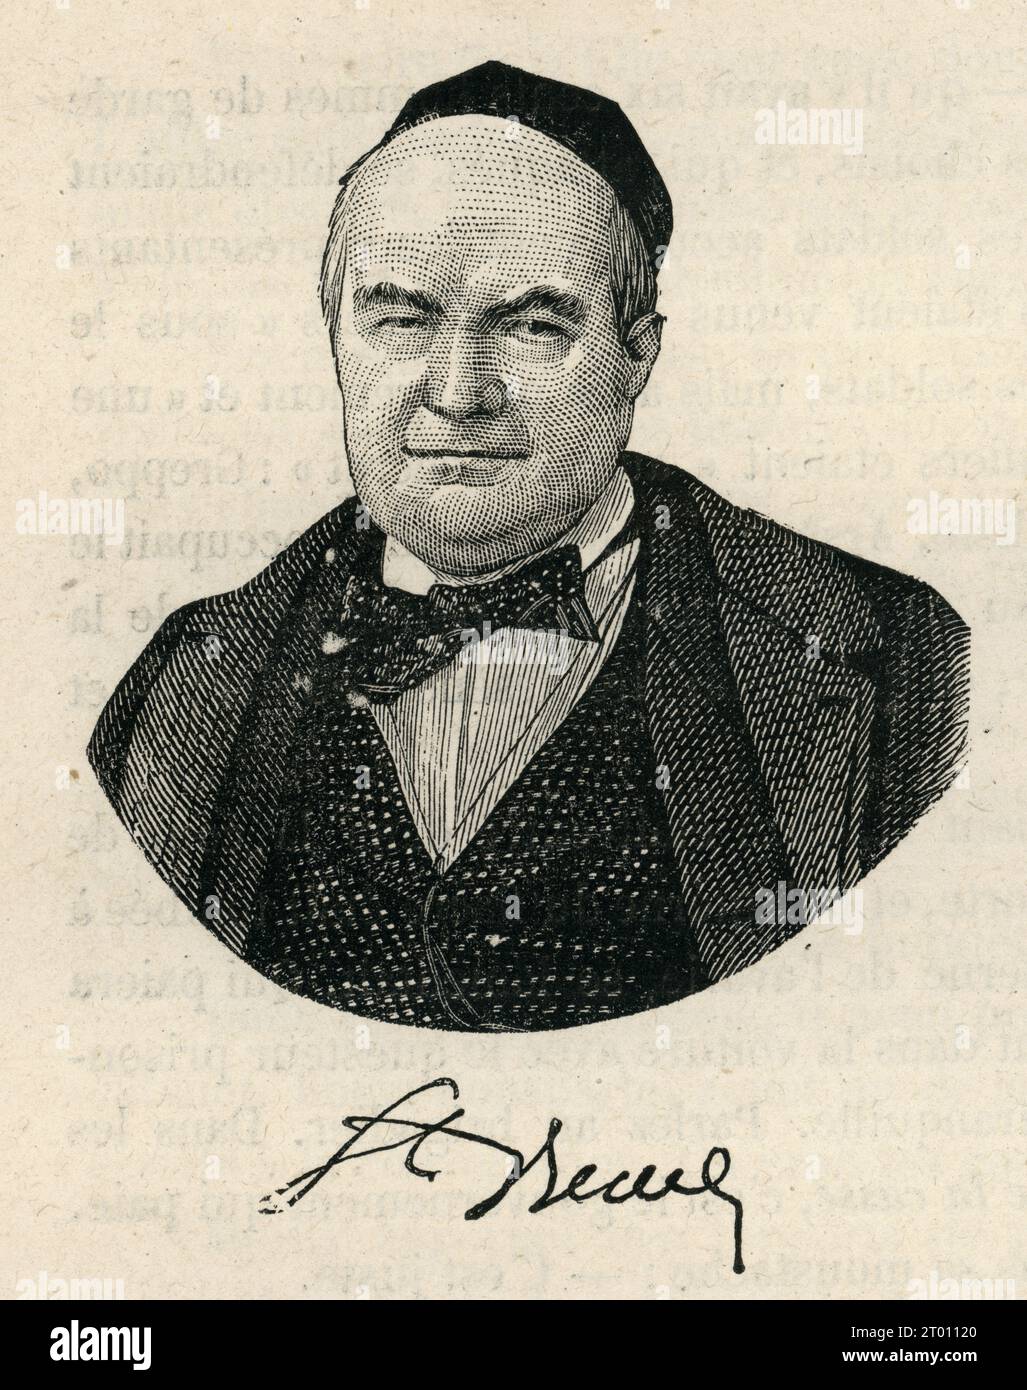 Portrait of Charles-Augustin Sainte-Beuve.  Illustration from 'Histoire d'un crime' ('The History of a Crime', written in 1852) and part of a set of engravings published in Victor Hugo's 'Oeuvres'. Book published in French by Eugène Hugues in 1879. Stock Photo